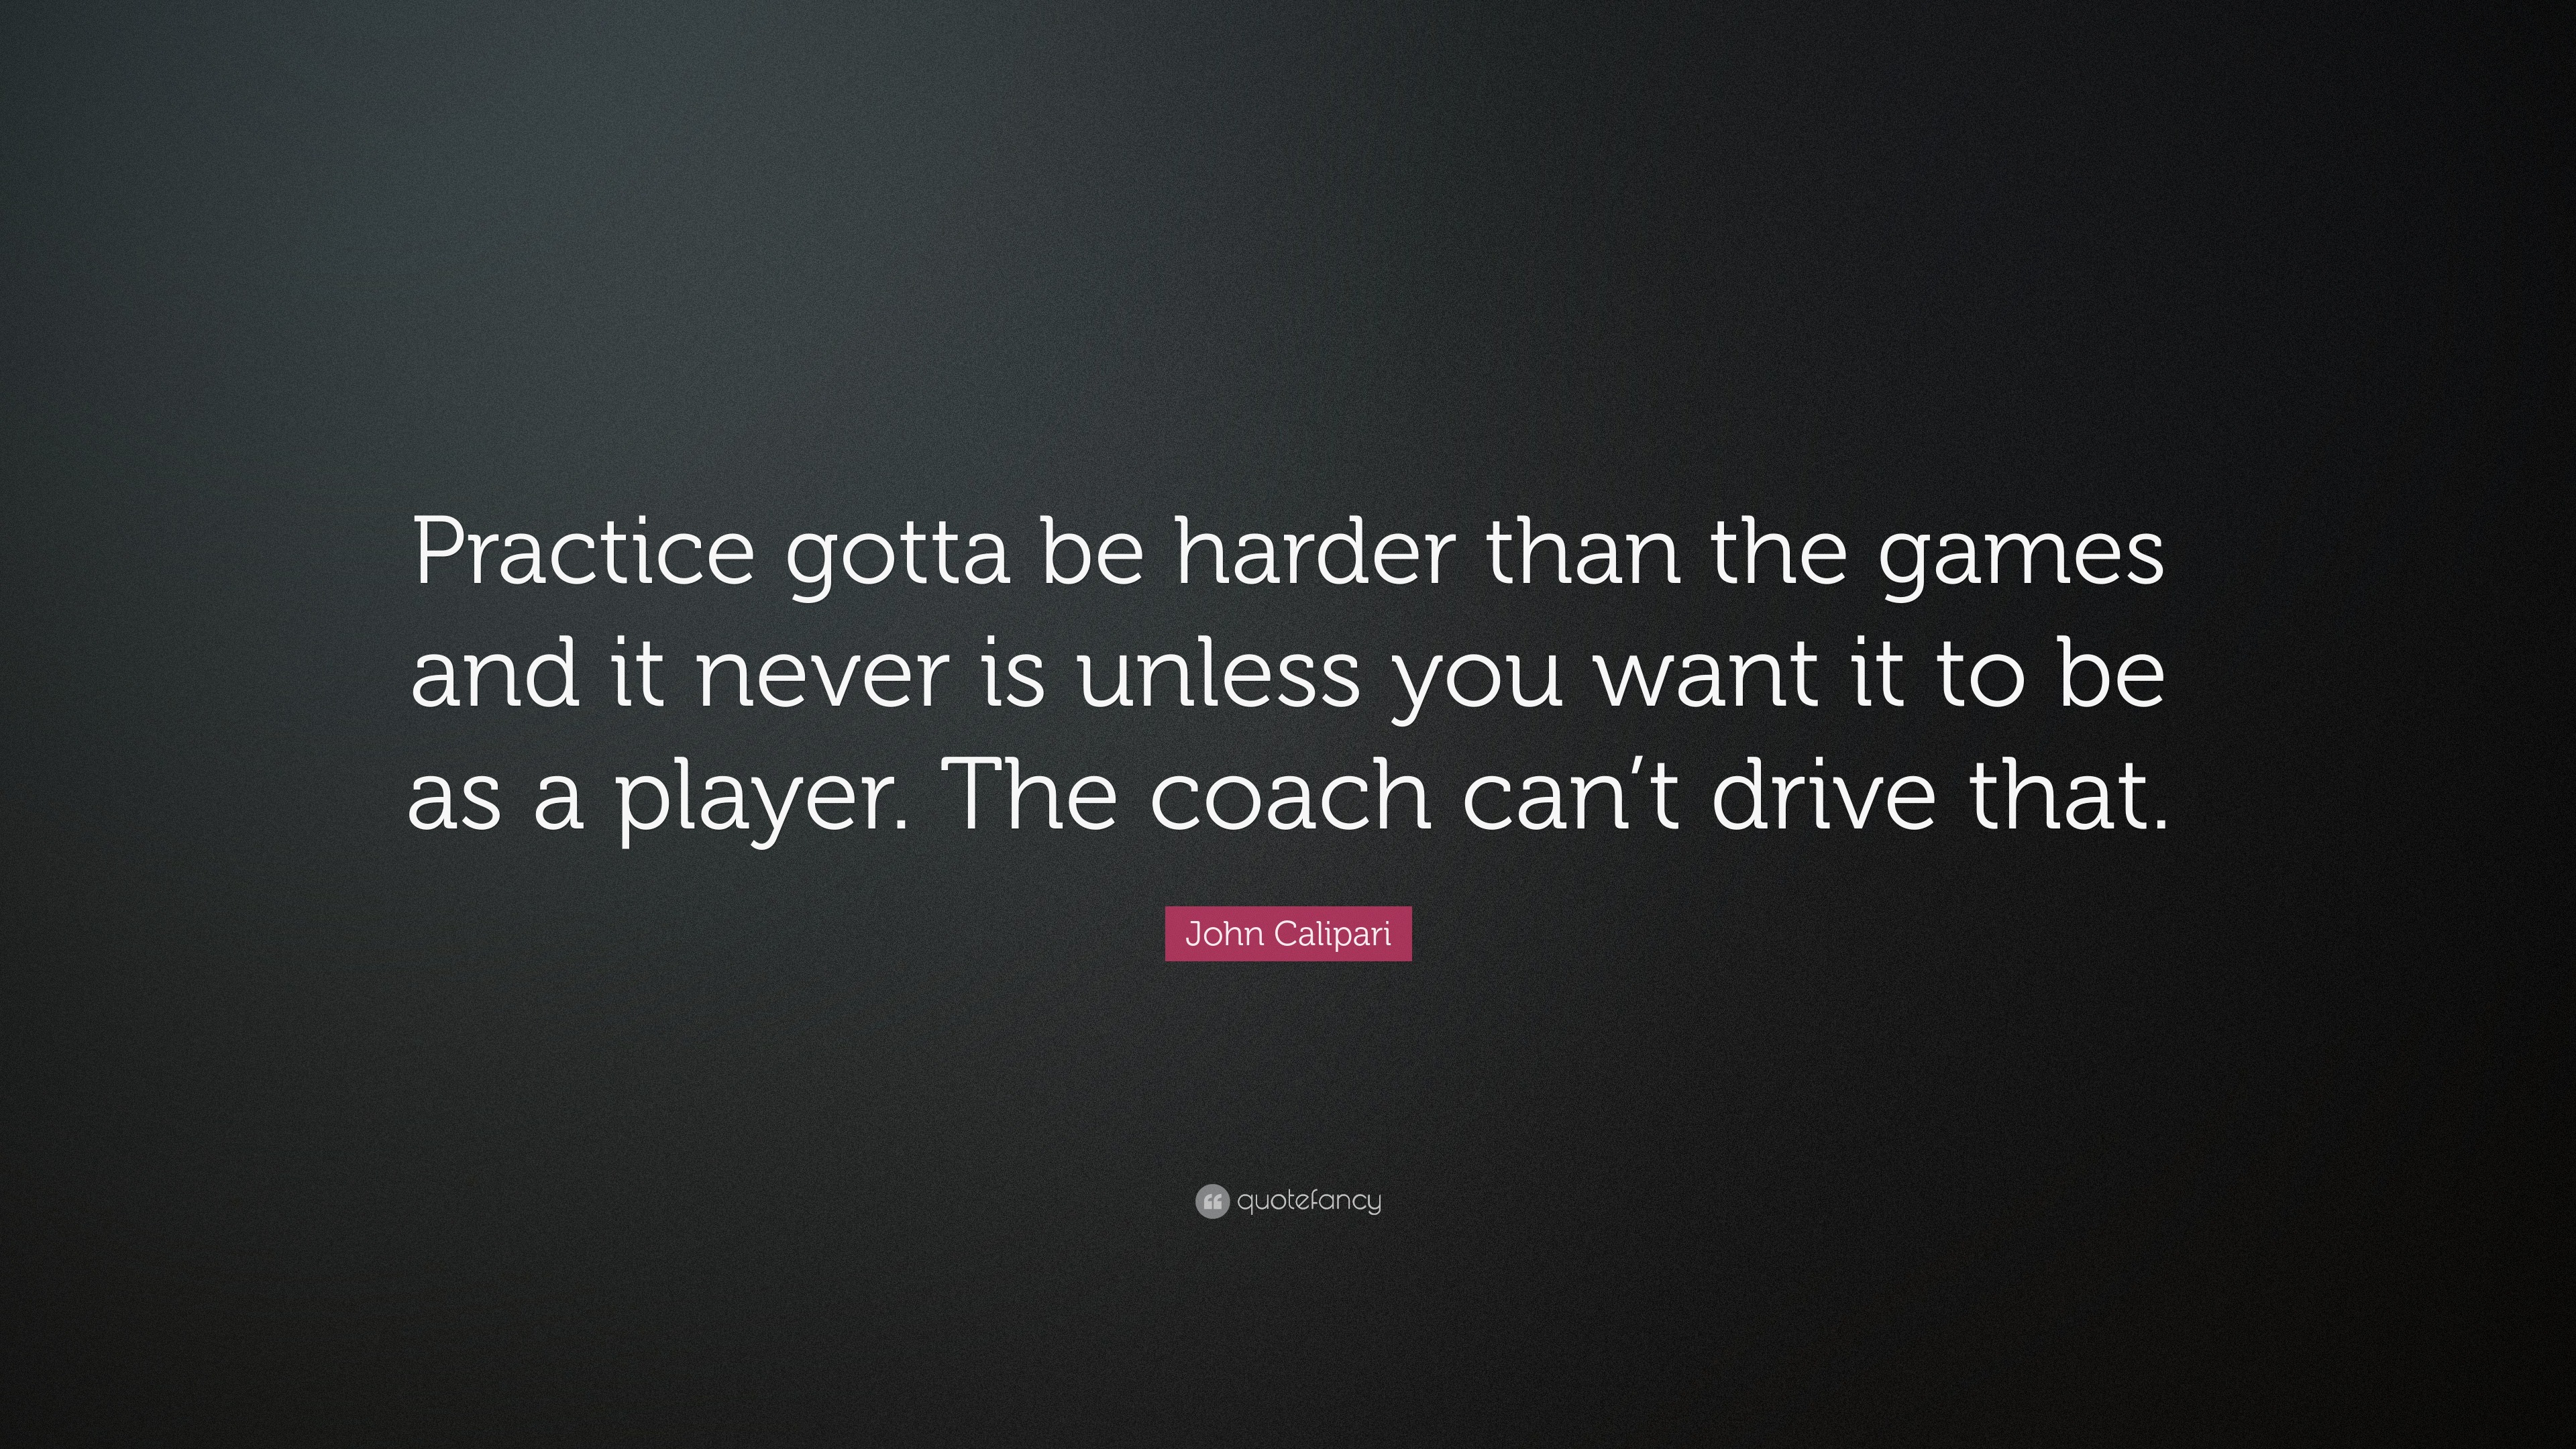 Why You Perform Better In Practice Than Games